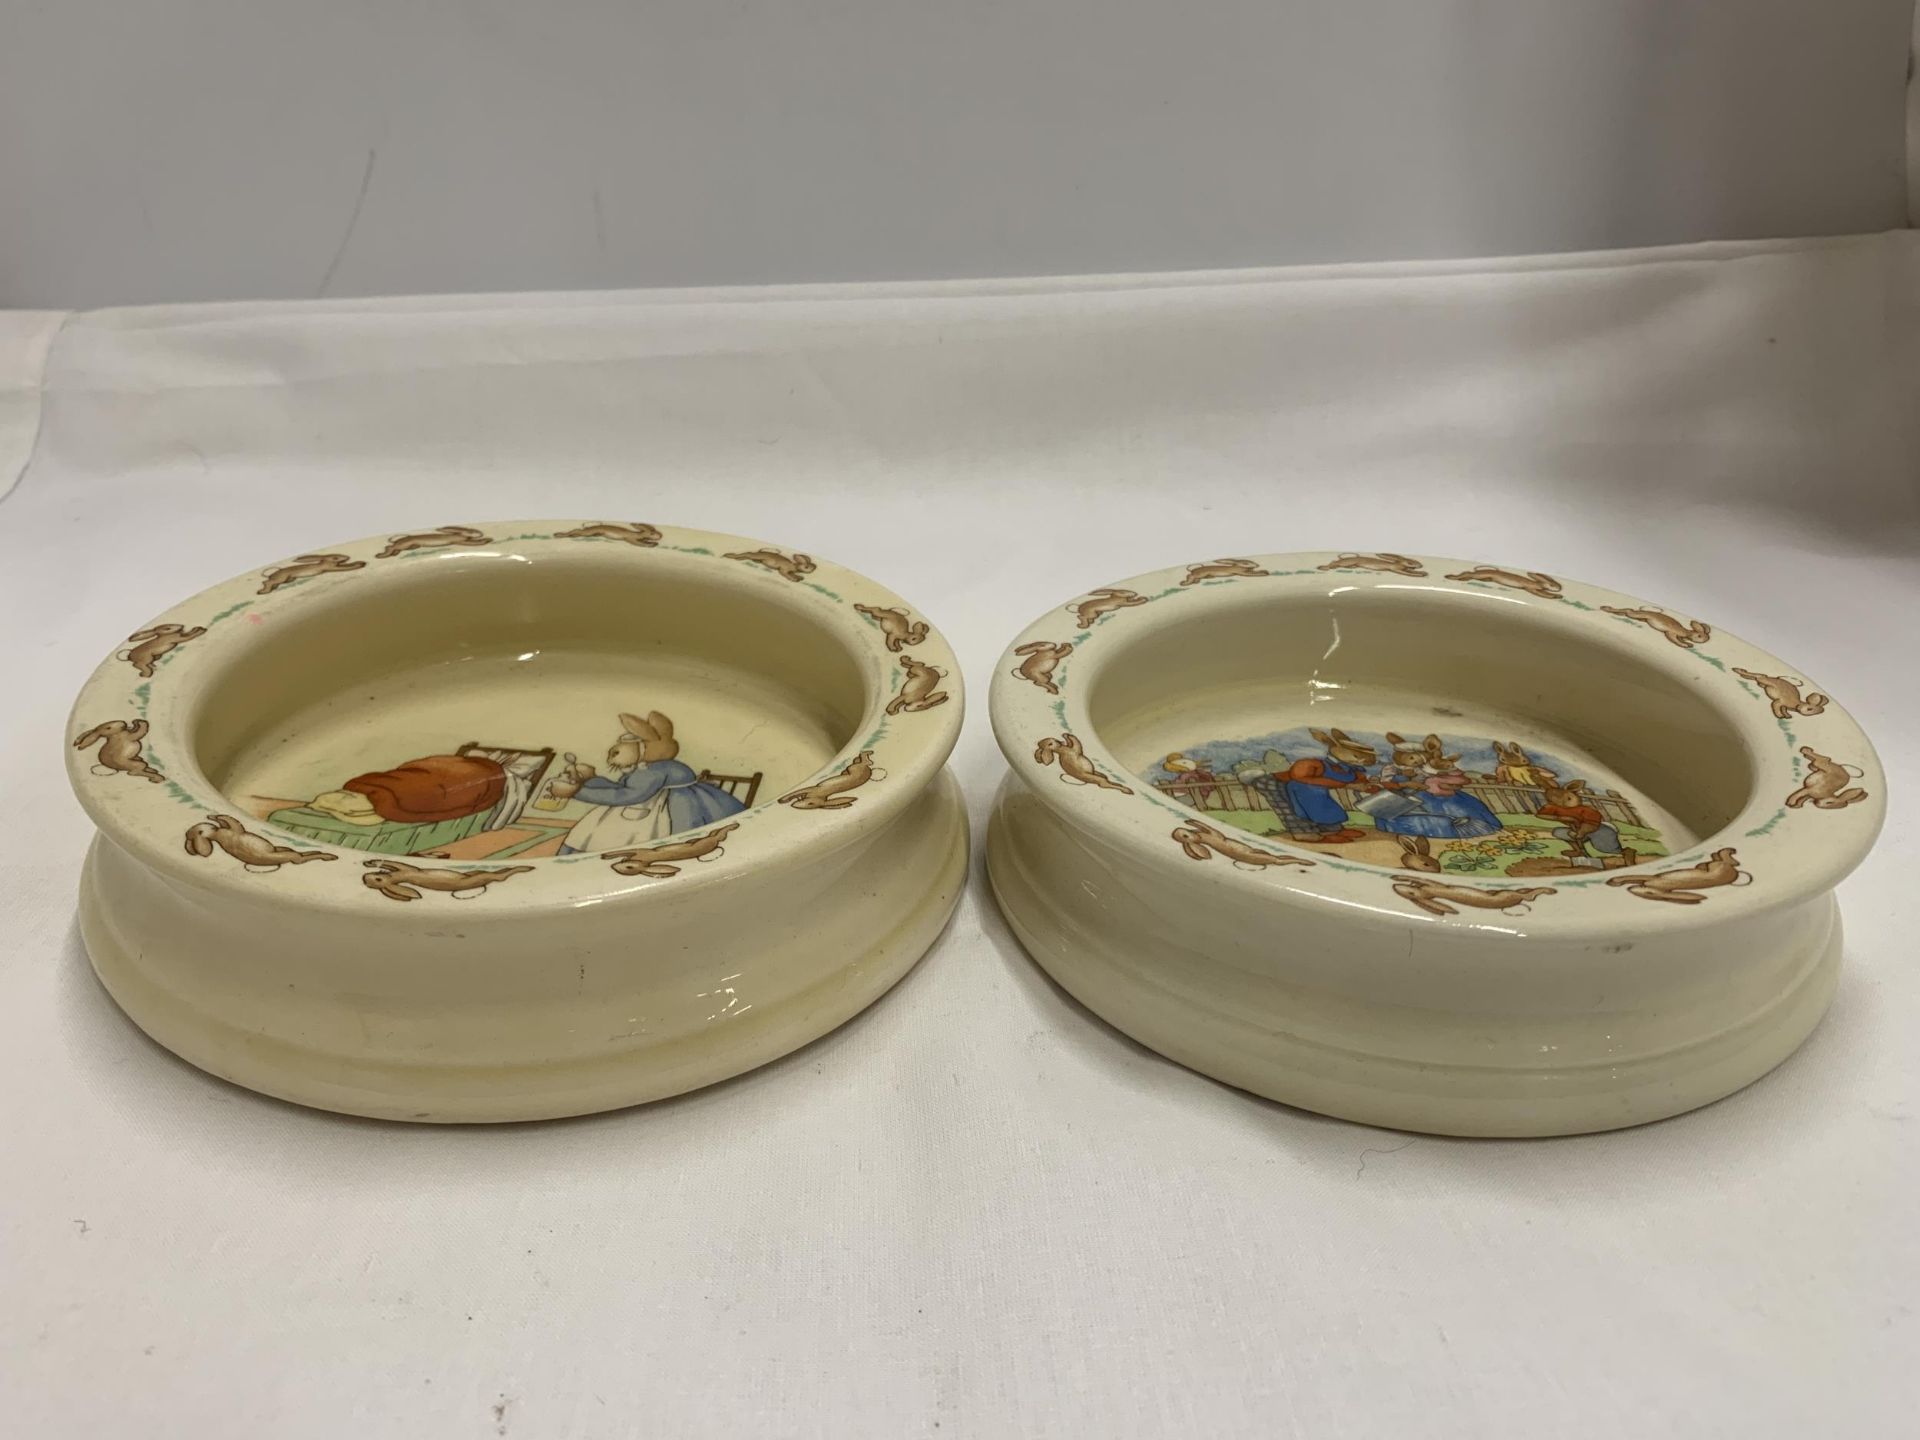 TWO ROYAL DOULTON BUNNYKINS DEEP IVORY GLAZED EARTHENWARE BABY PLATES "MEDICINE TIME" PRODUCED UNTIL - Image 2 of 4